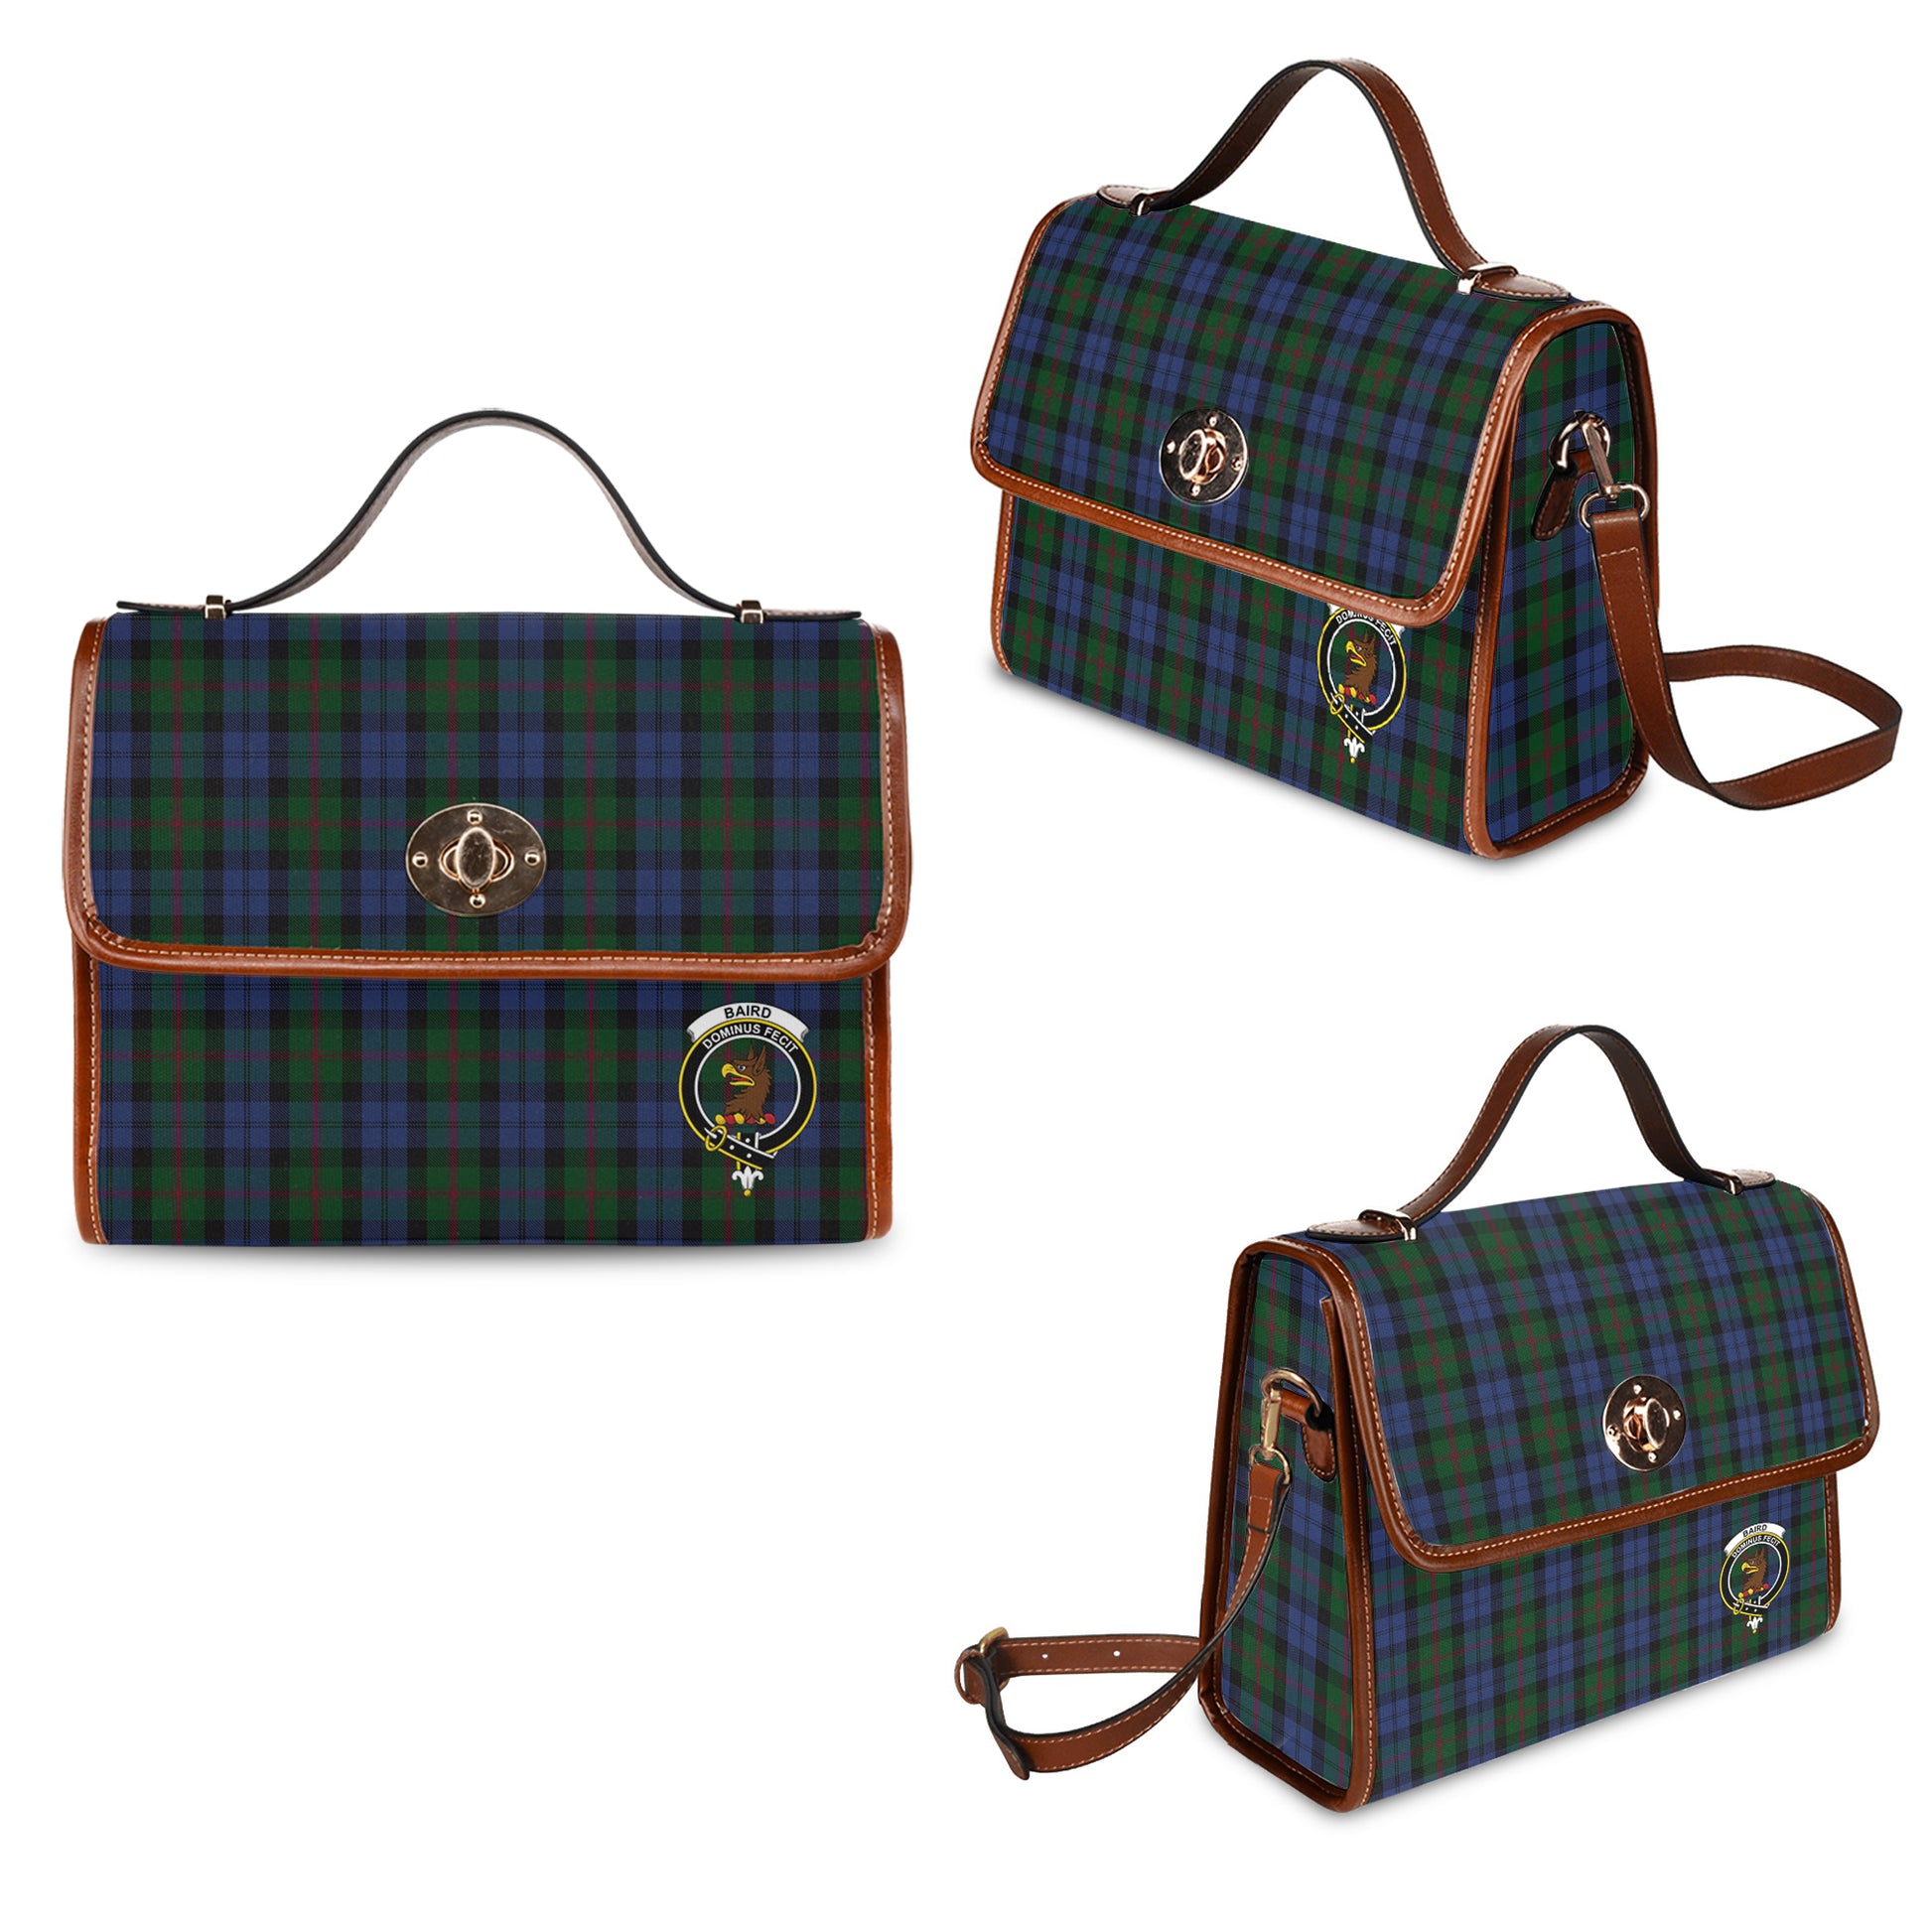 Baird Tartan Leather Strap Waterproof Canvas Bag with Family Crest One Size 34cm * 42cm (13.4" x 16.5") - Tartanvibesclothing